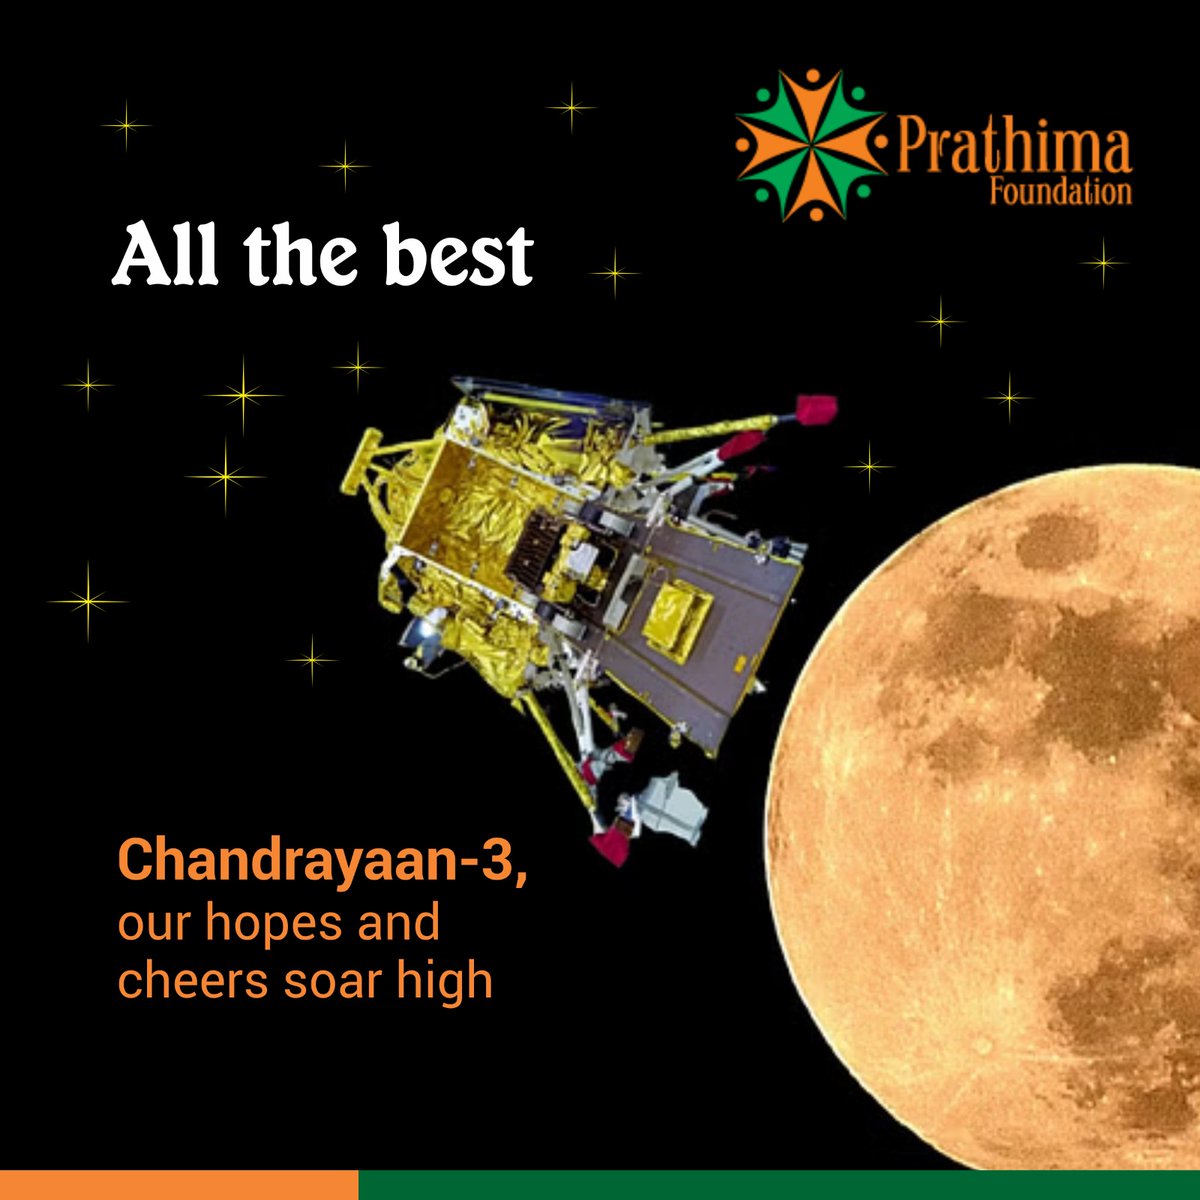 All the best Chandrayaan-3, our hopes and cheers soar high.

#chandran3 #isro #Chandrayan #IndiaInSpace #SpaceScience #MoonMission #IndiaOnTheMoon #MissionToTheMoon #ISROMissions #MoonMission2023 #IndiaSpaceProgram #prathimafoundation #prathima #pf #bestfoundation